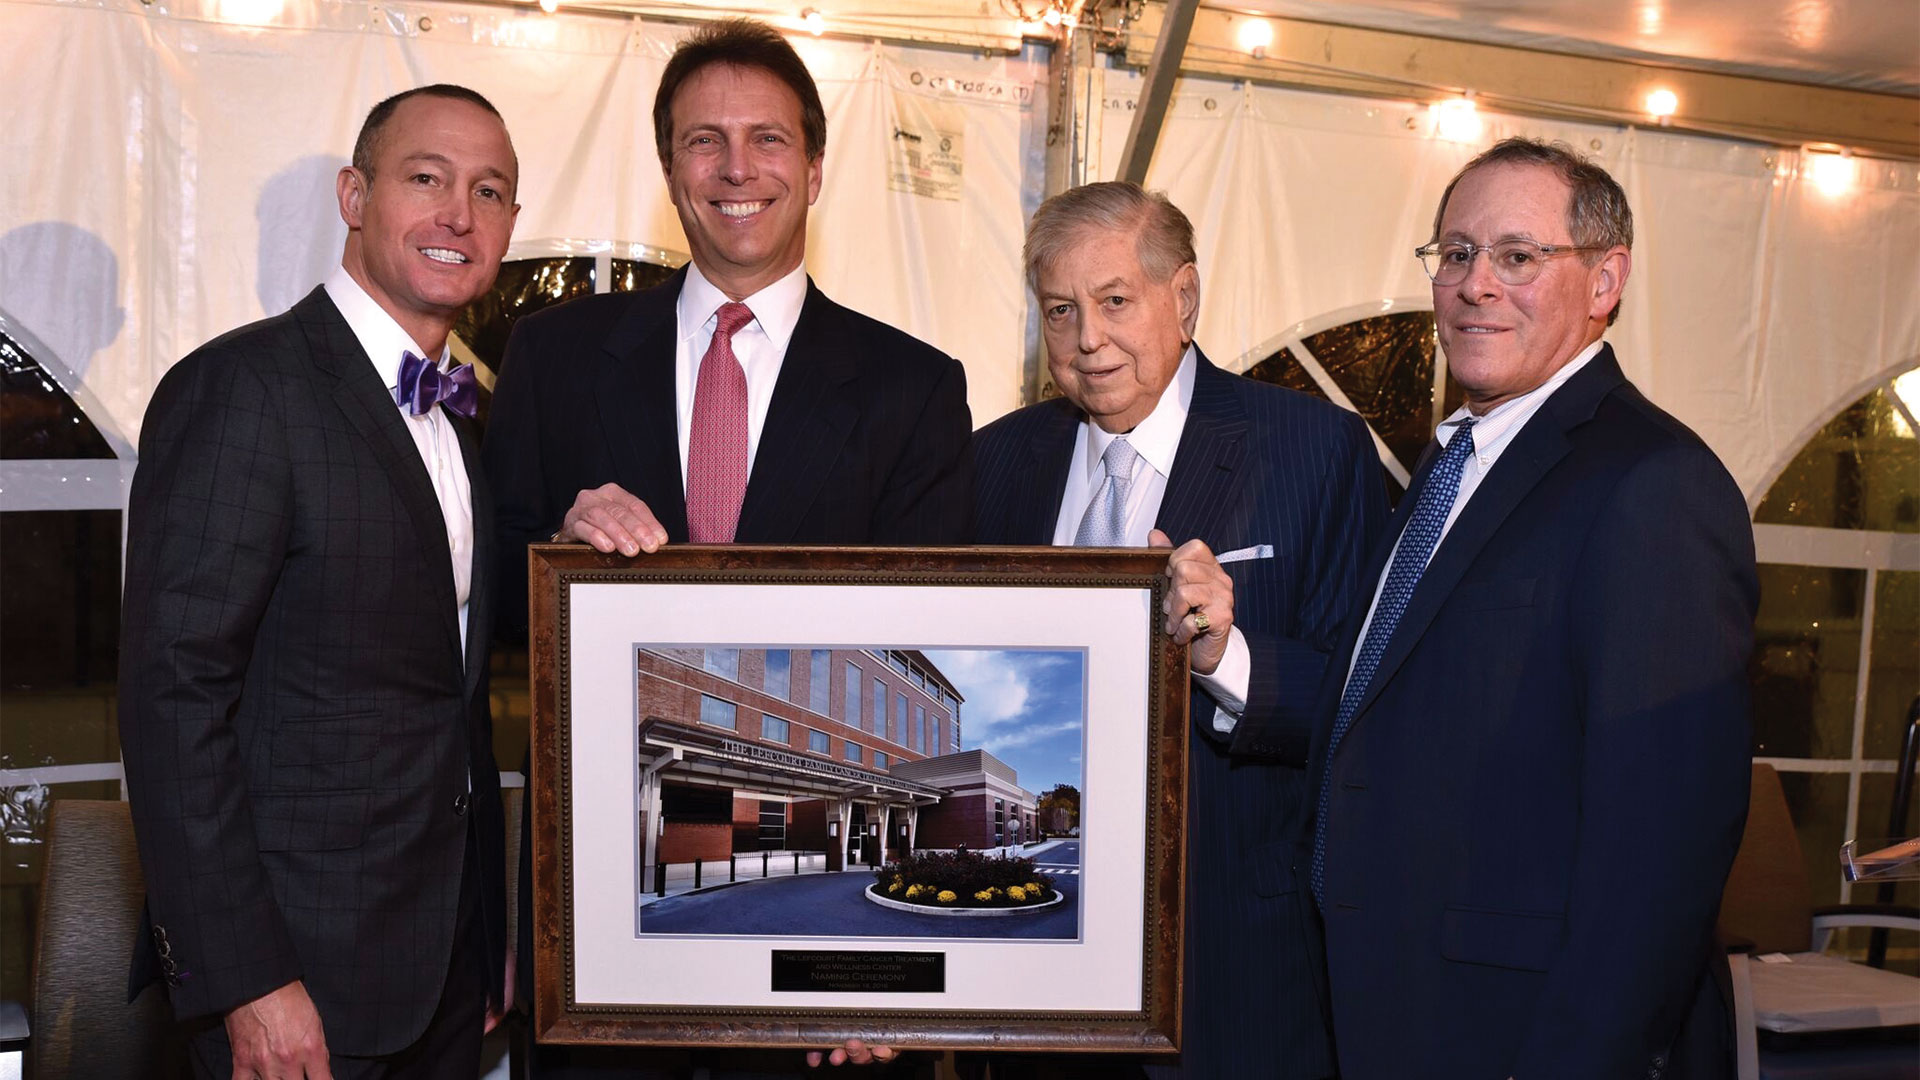 Warren Geller, president and CEO, Englewood Health and Englewood Hospital; Jay Nadel, chairman, Board of Trustees, Englewood Health Foundation; Ronald Lefcourt, benefactor; and Thomas C. Senter, Esq., chairman, Boards of Trustees, Englewood Health and Englewood Hospital.